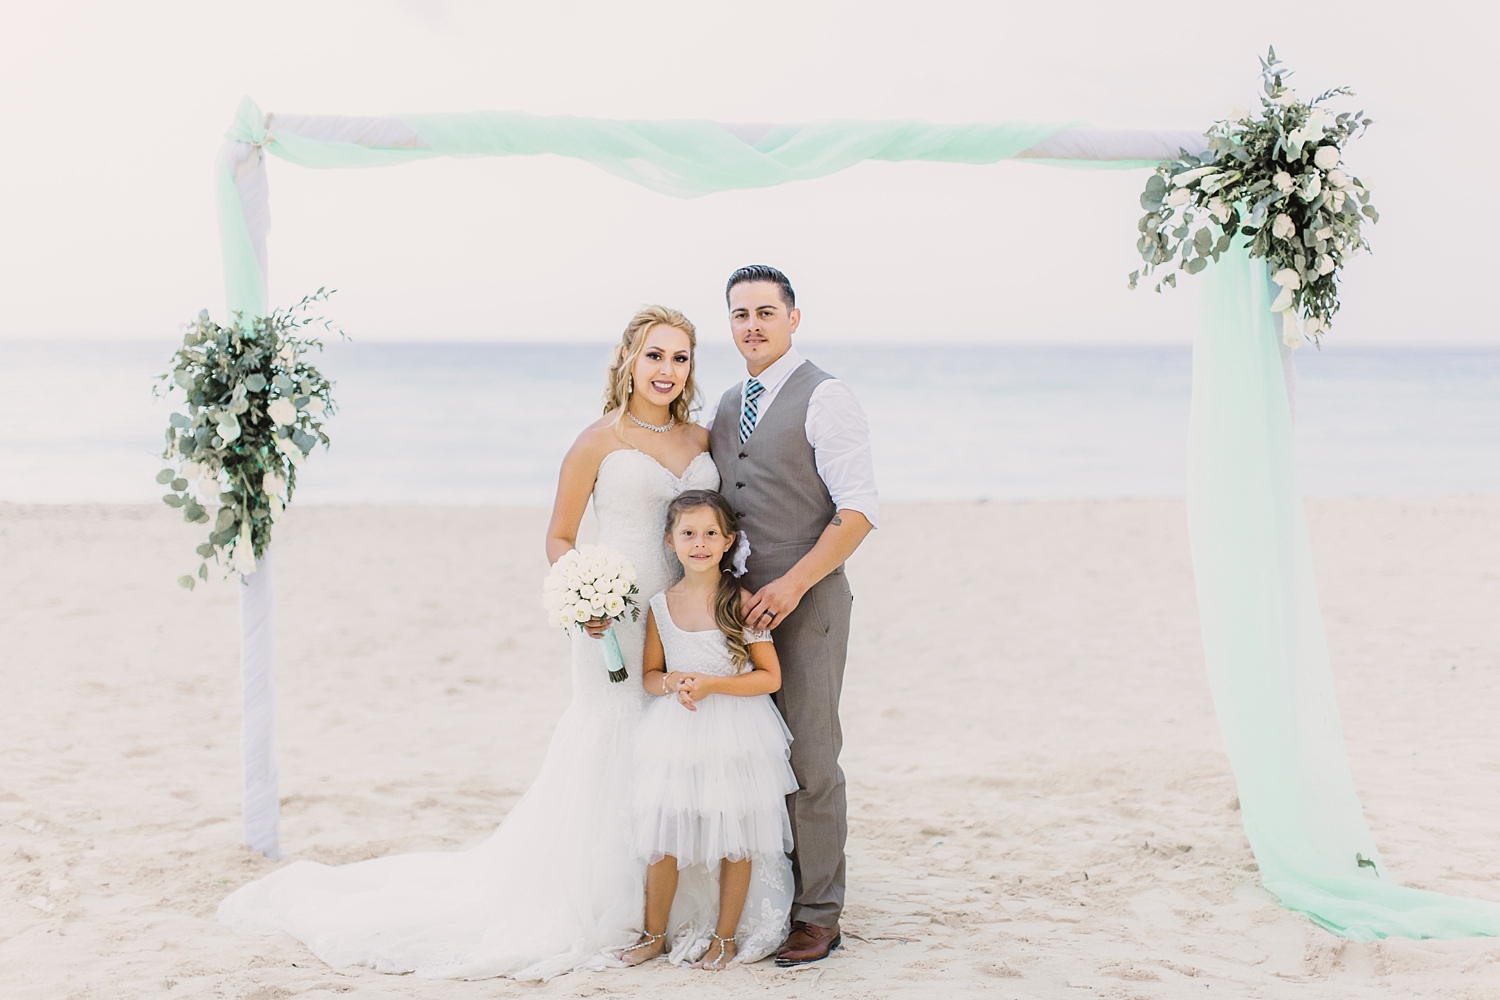 newlyweds family photo on beach in Oasis Cancun wedding